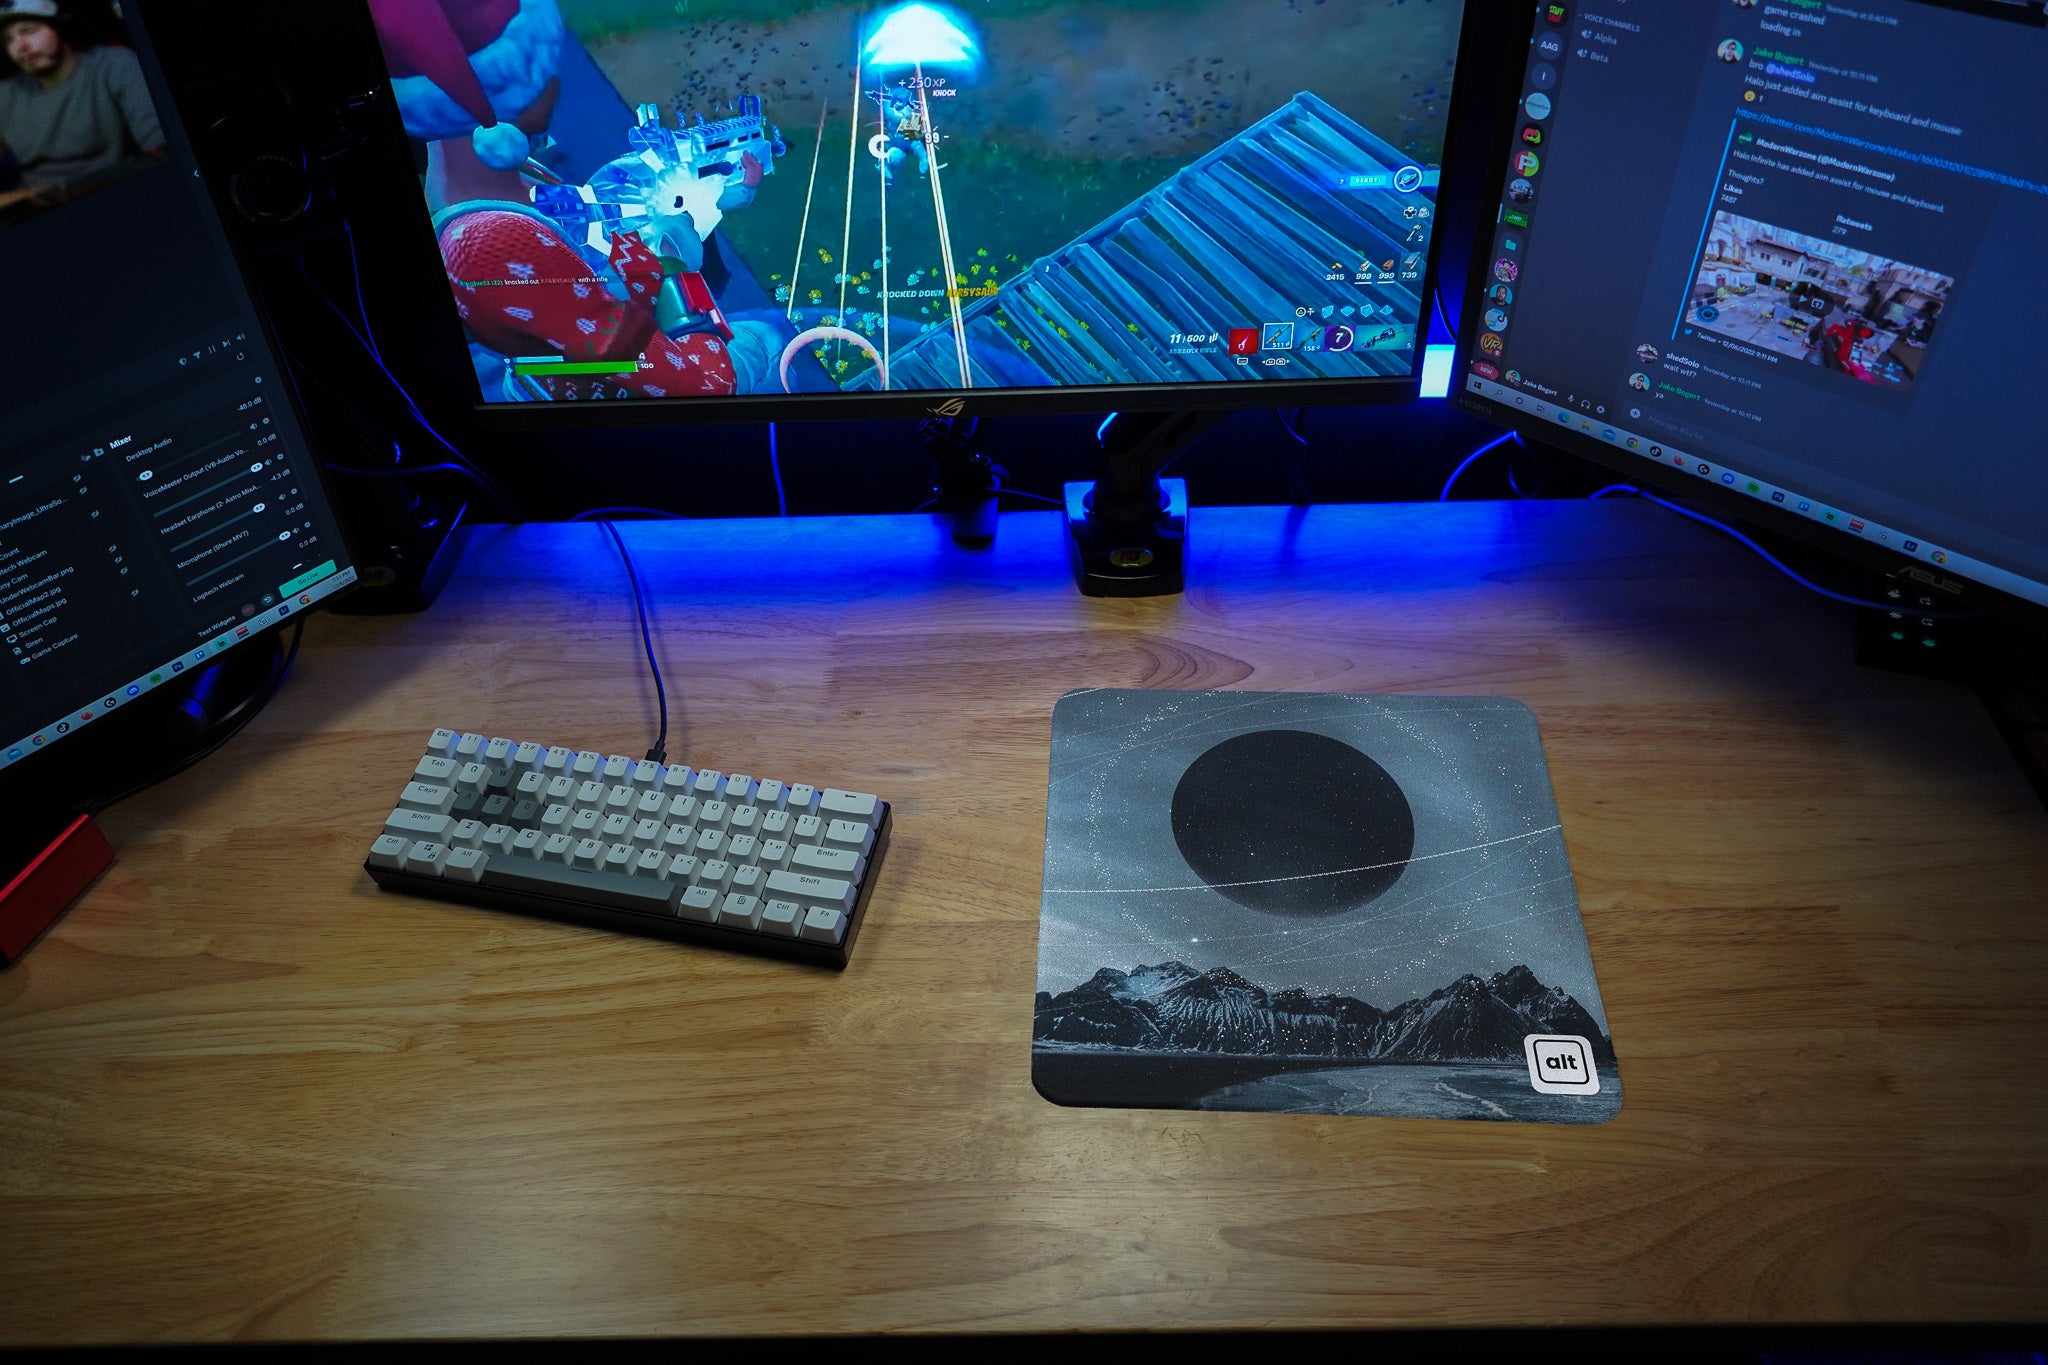 Another Universe Mousepad